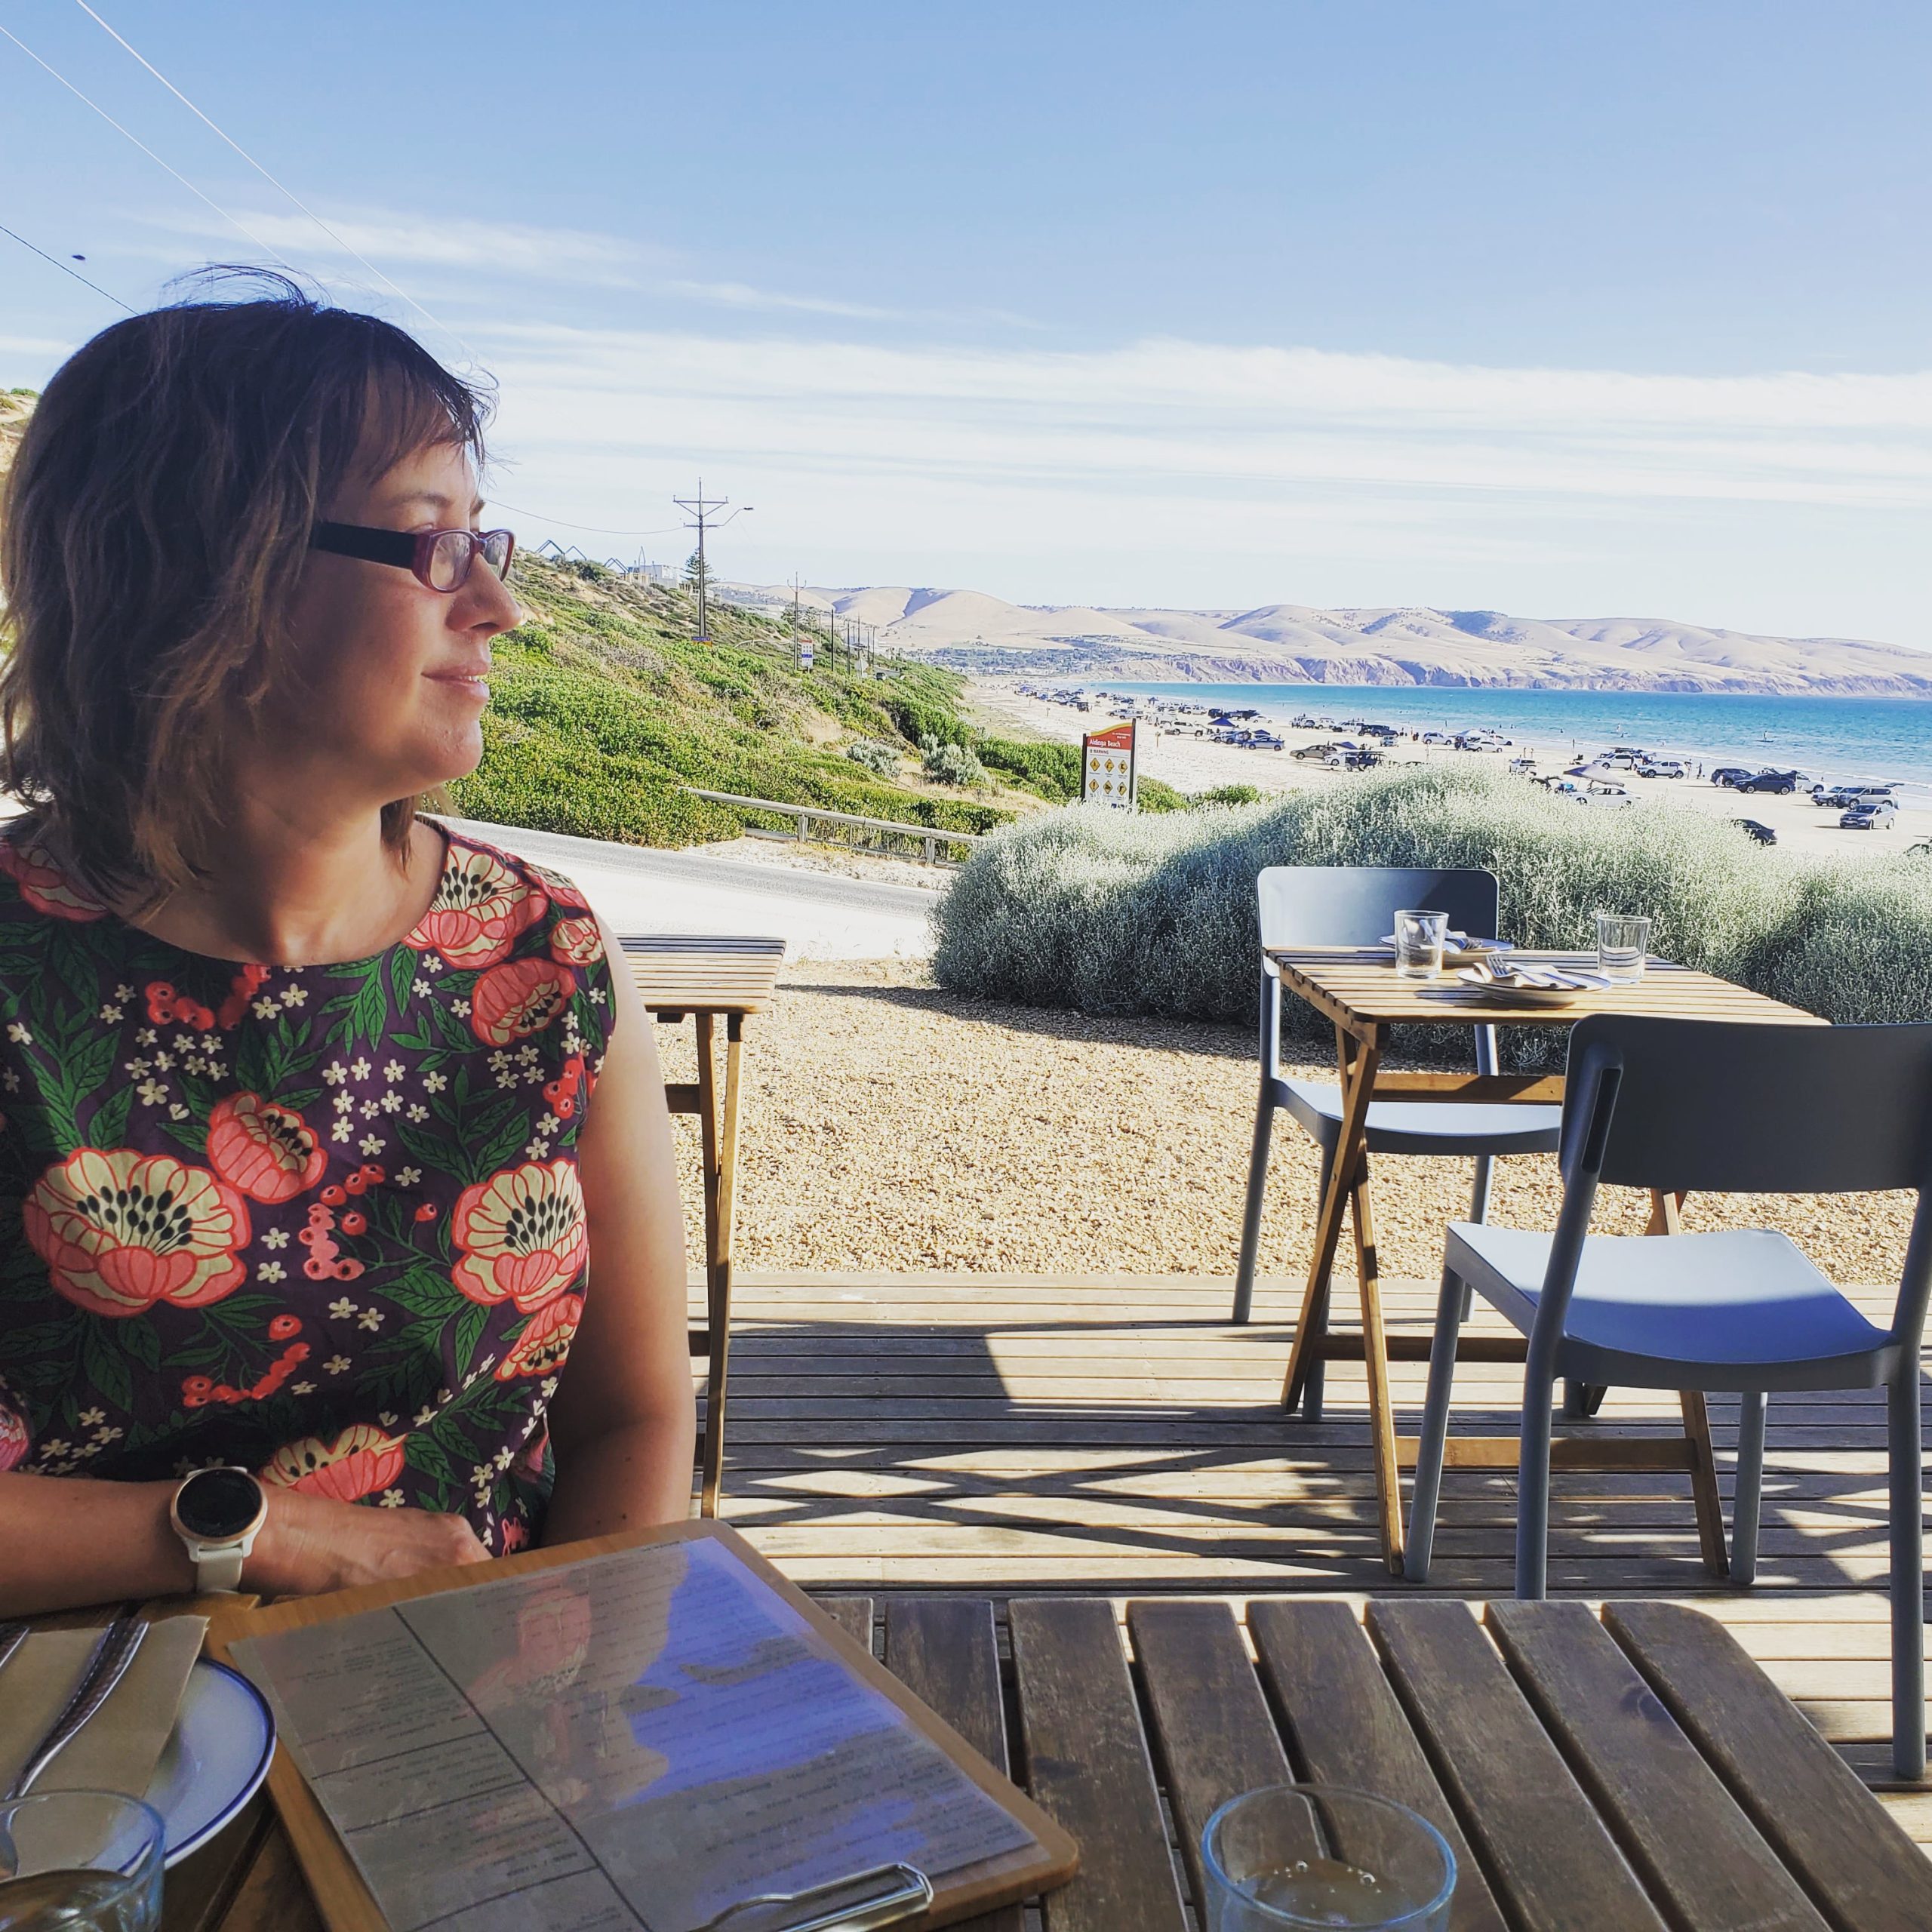 Woman with colourful top looks out over the coast whilst sitting at a cafe table.